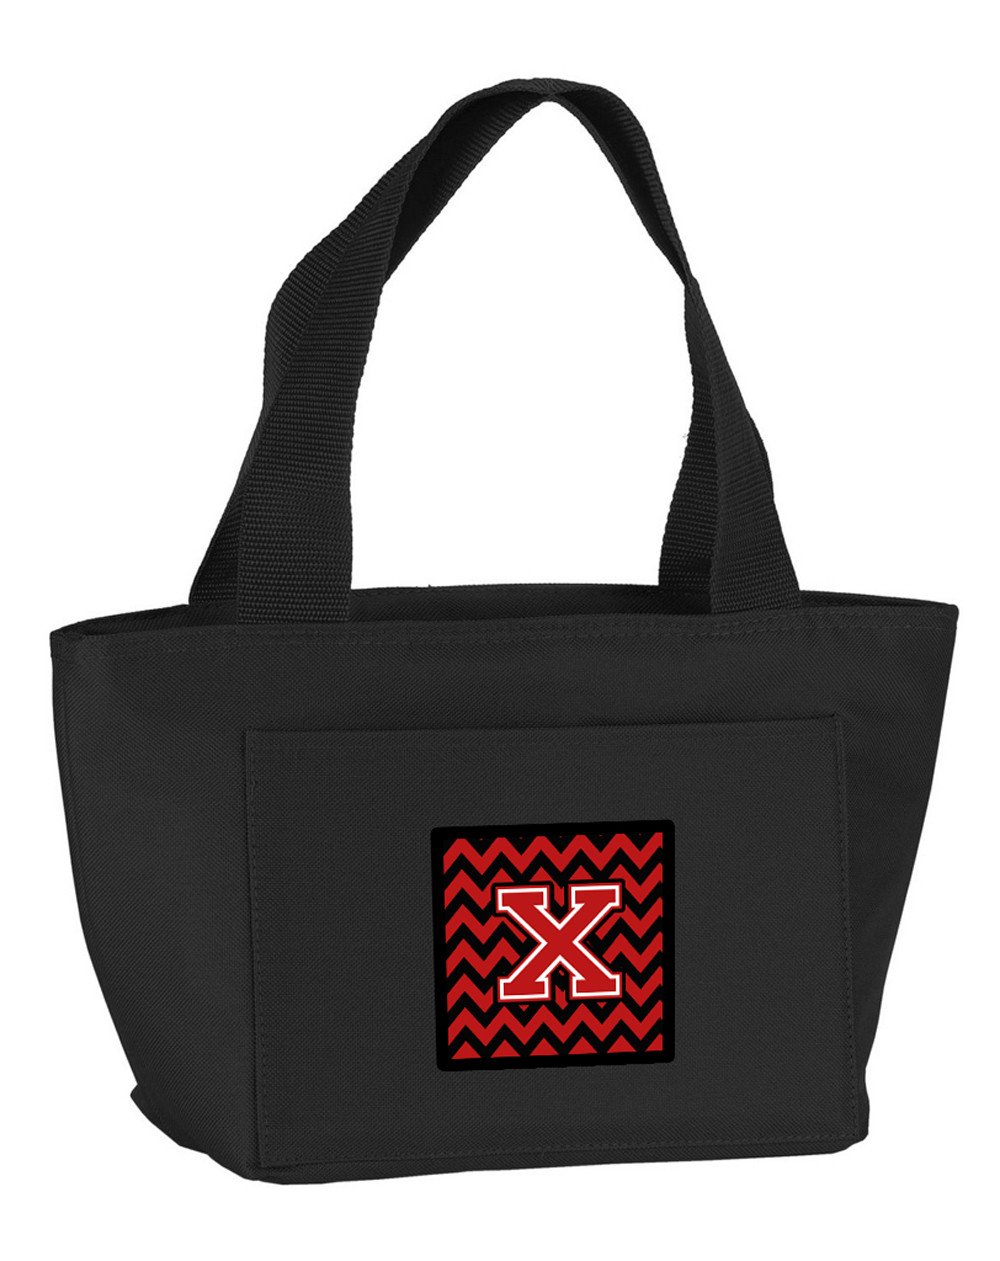 Letter X Chevron Black and Red   Lunch Bag CJ1047-XBK-8808 by Caroline's Treasures